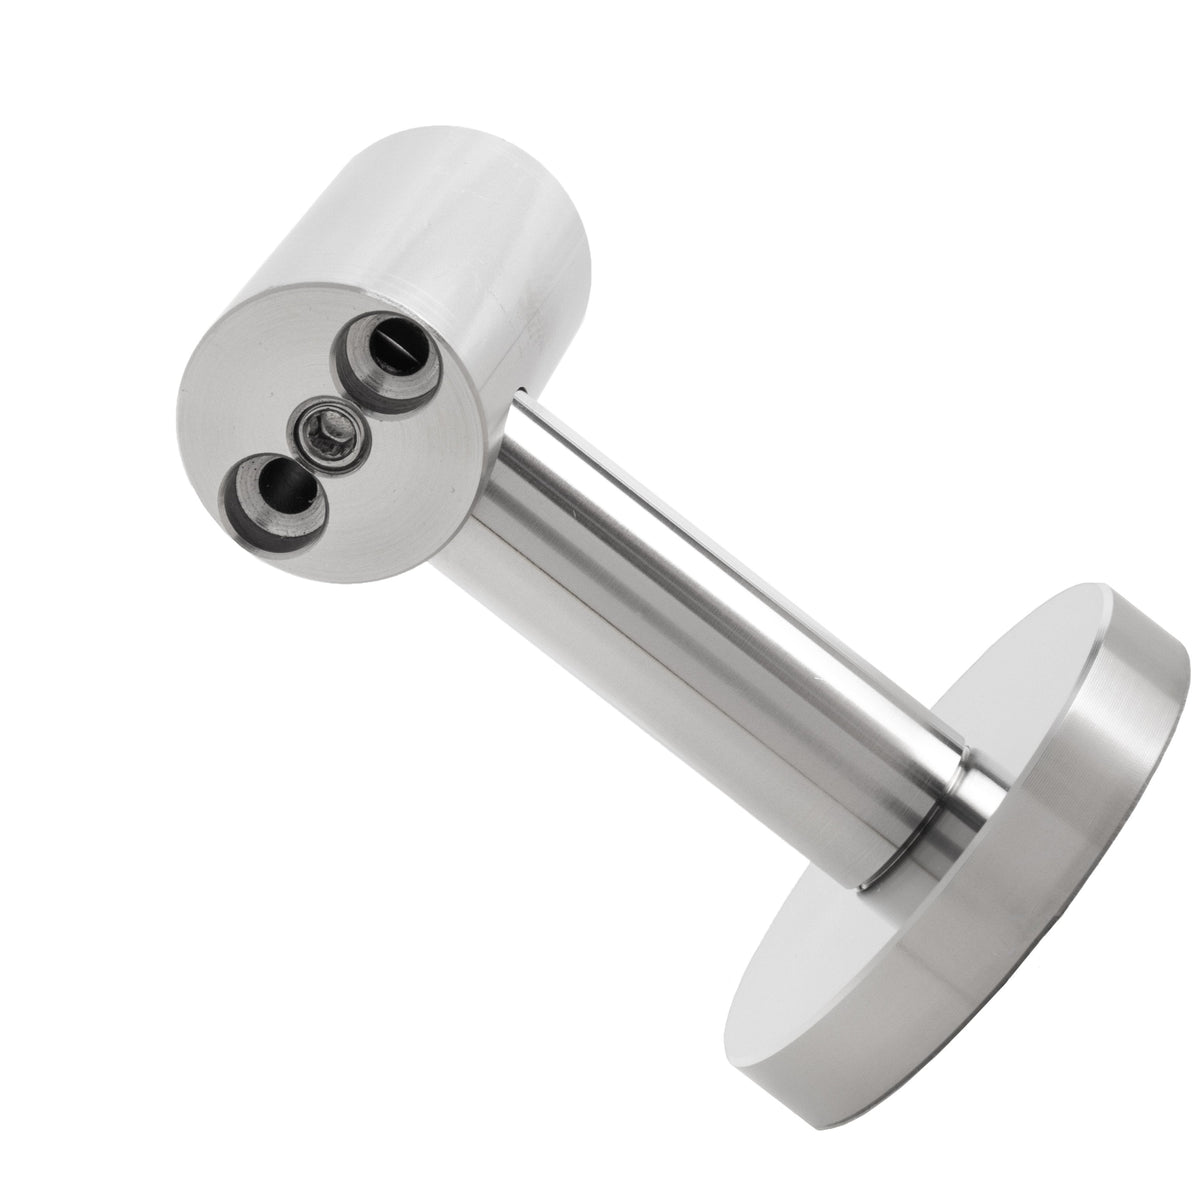 Stainless Steel Wall Mounted Handrail Bracket Handrail Northern Indiana Axle 